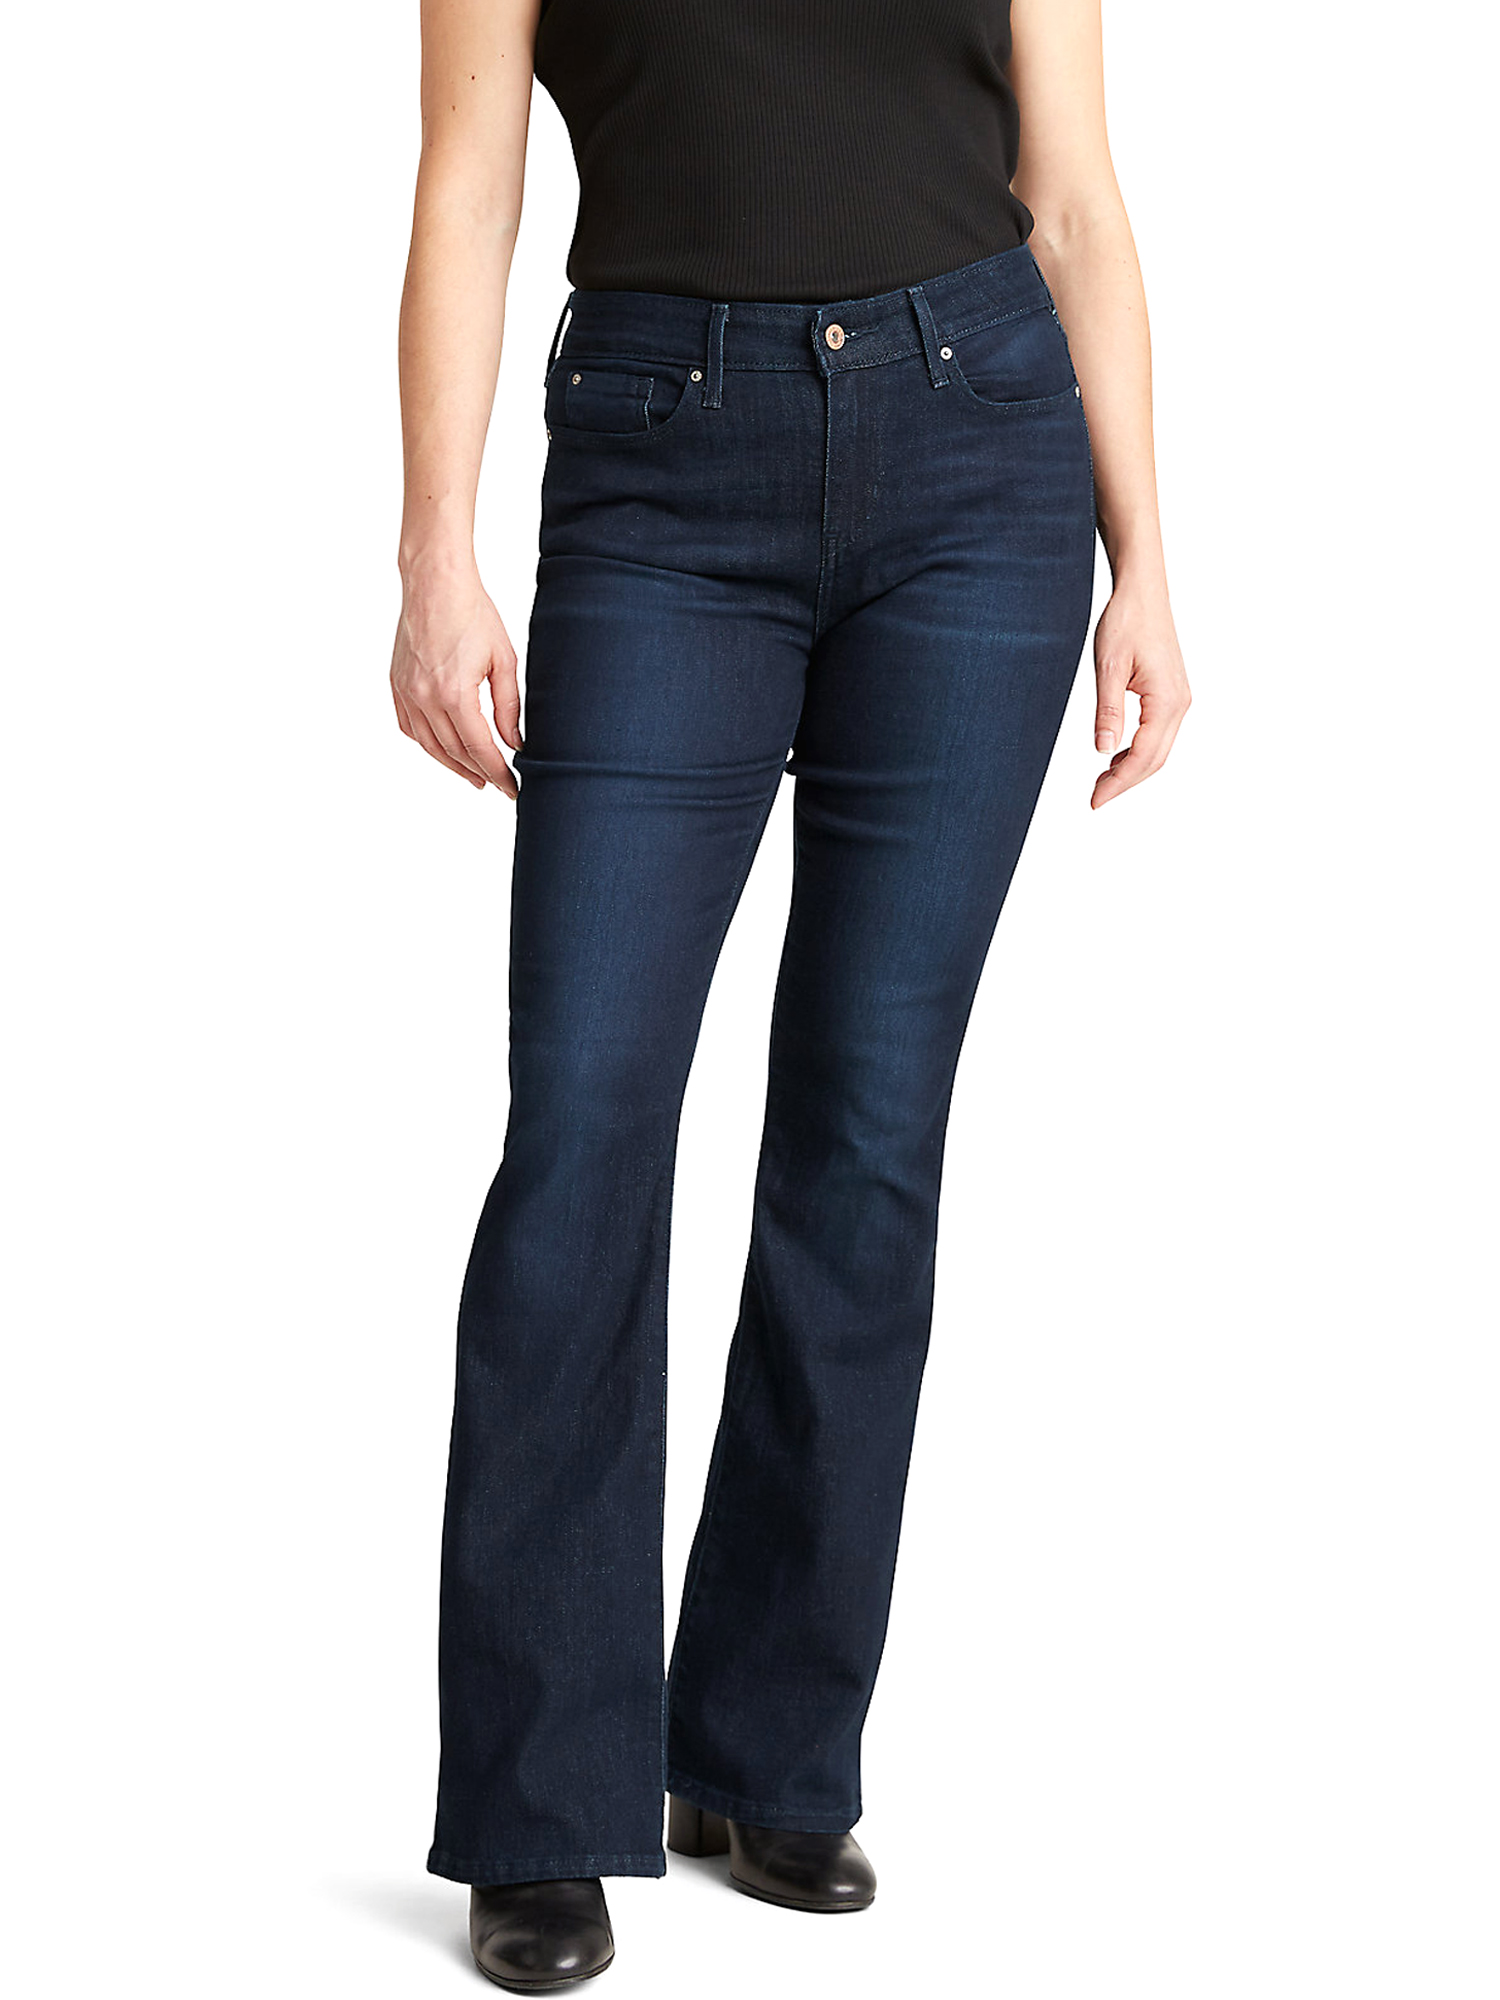 Signature by Levi Strauss & Co. Women's and Women's Plus Modern Bootcut Jeans - image 1 of 6